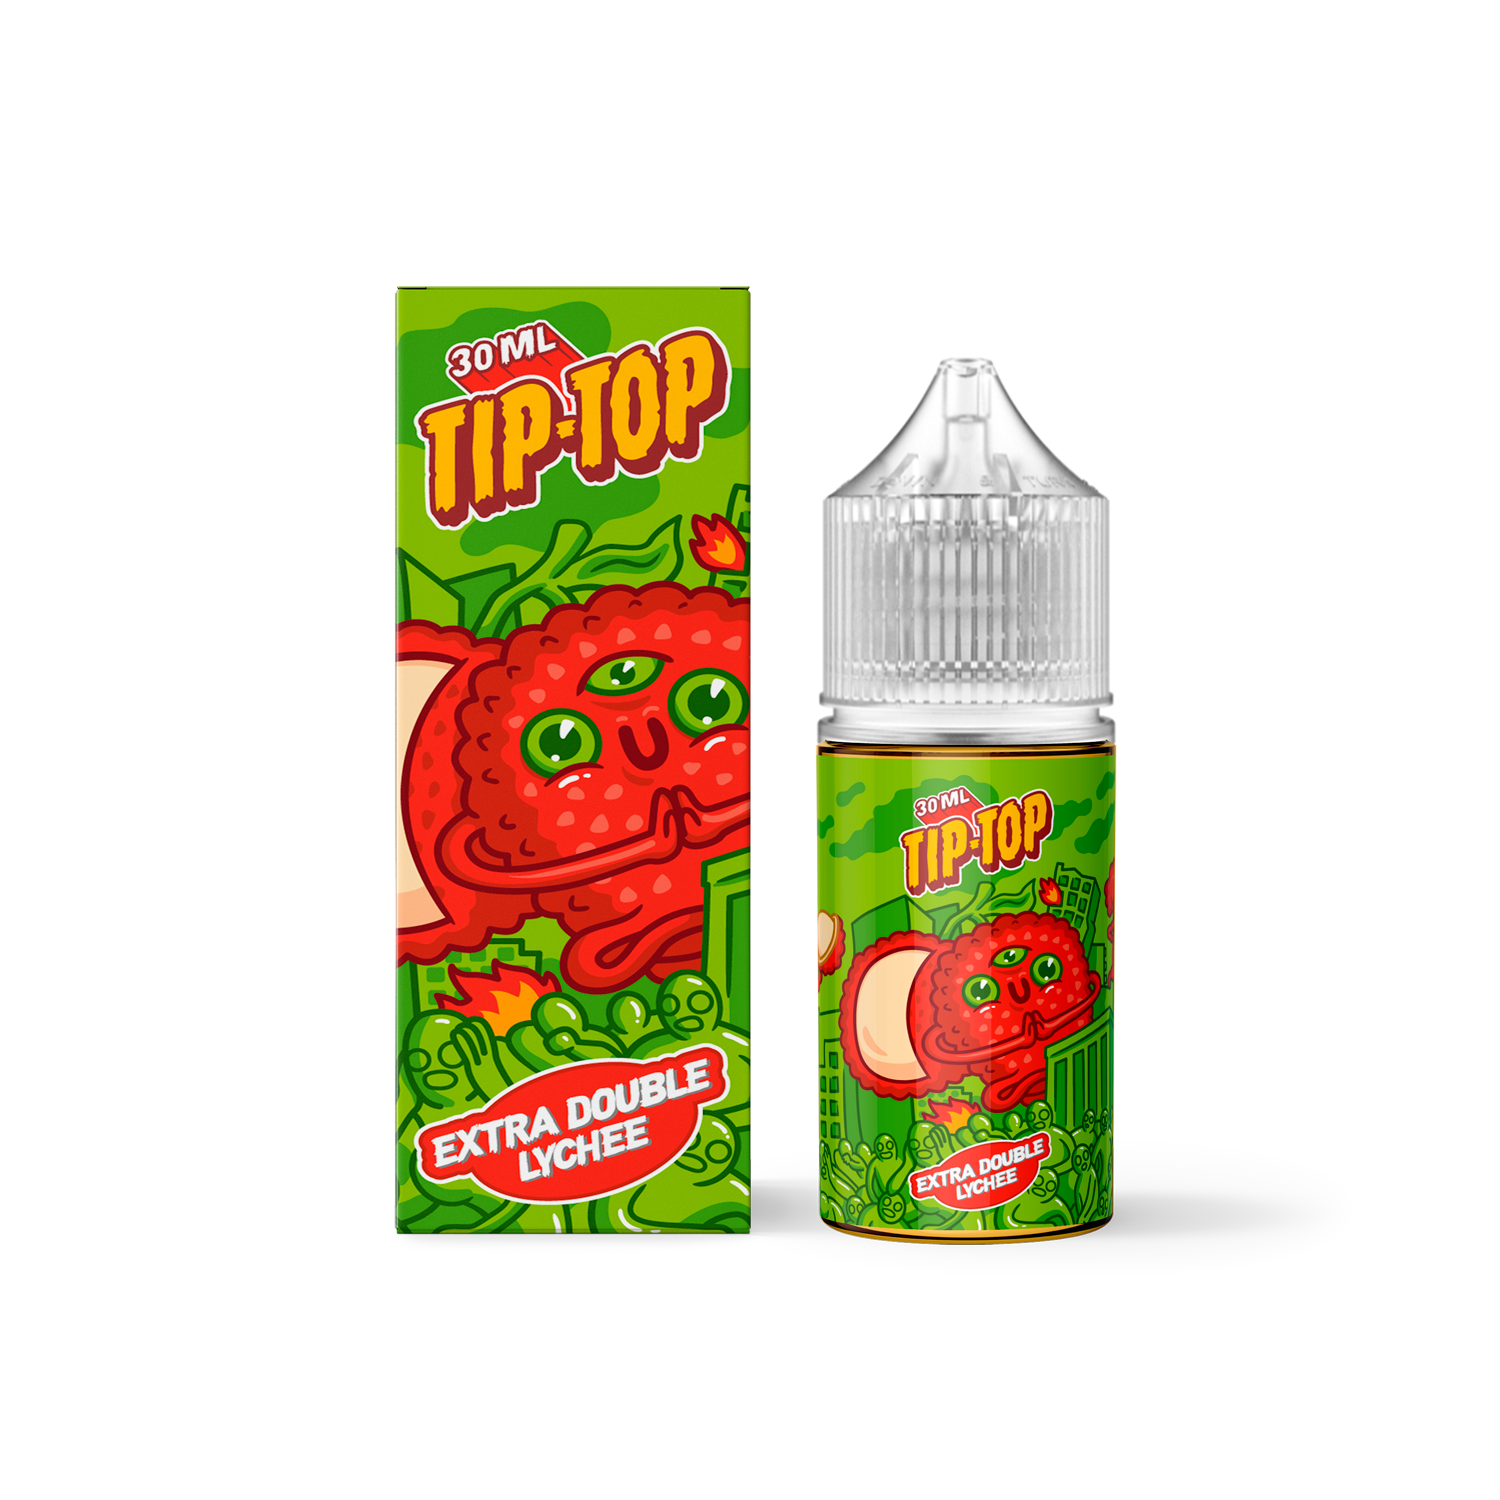 TIP TOP: EXTRA DOUBLE LYCHEE30ML 20MG